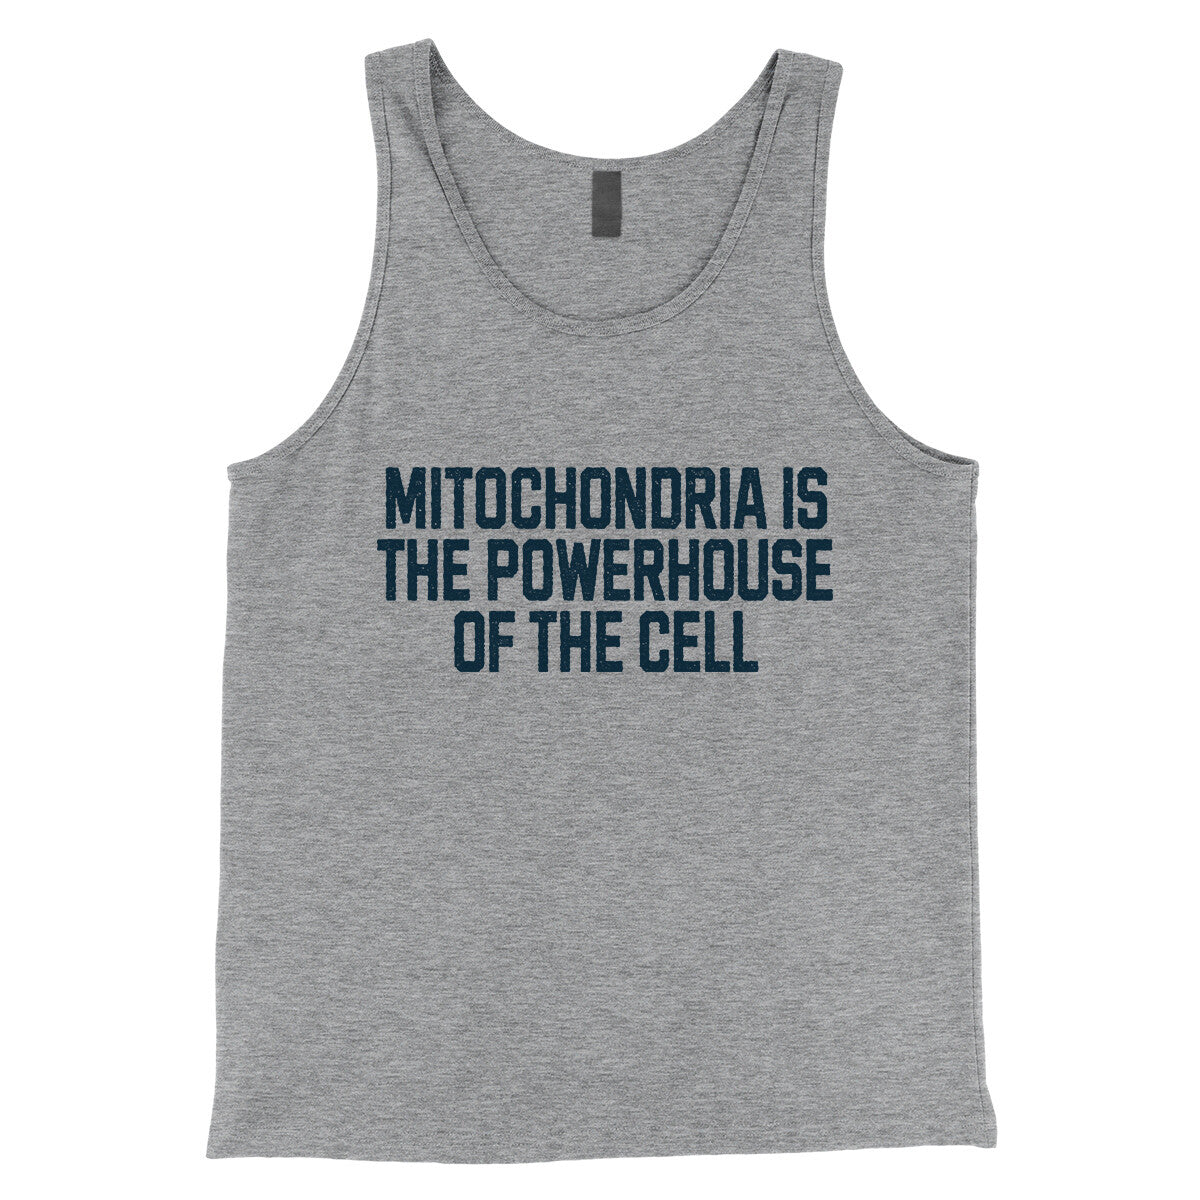 Mitochondria is the Powerhouse of the Cell in Athletic Heather Color